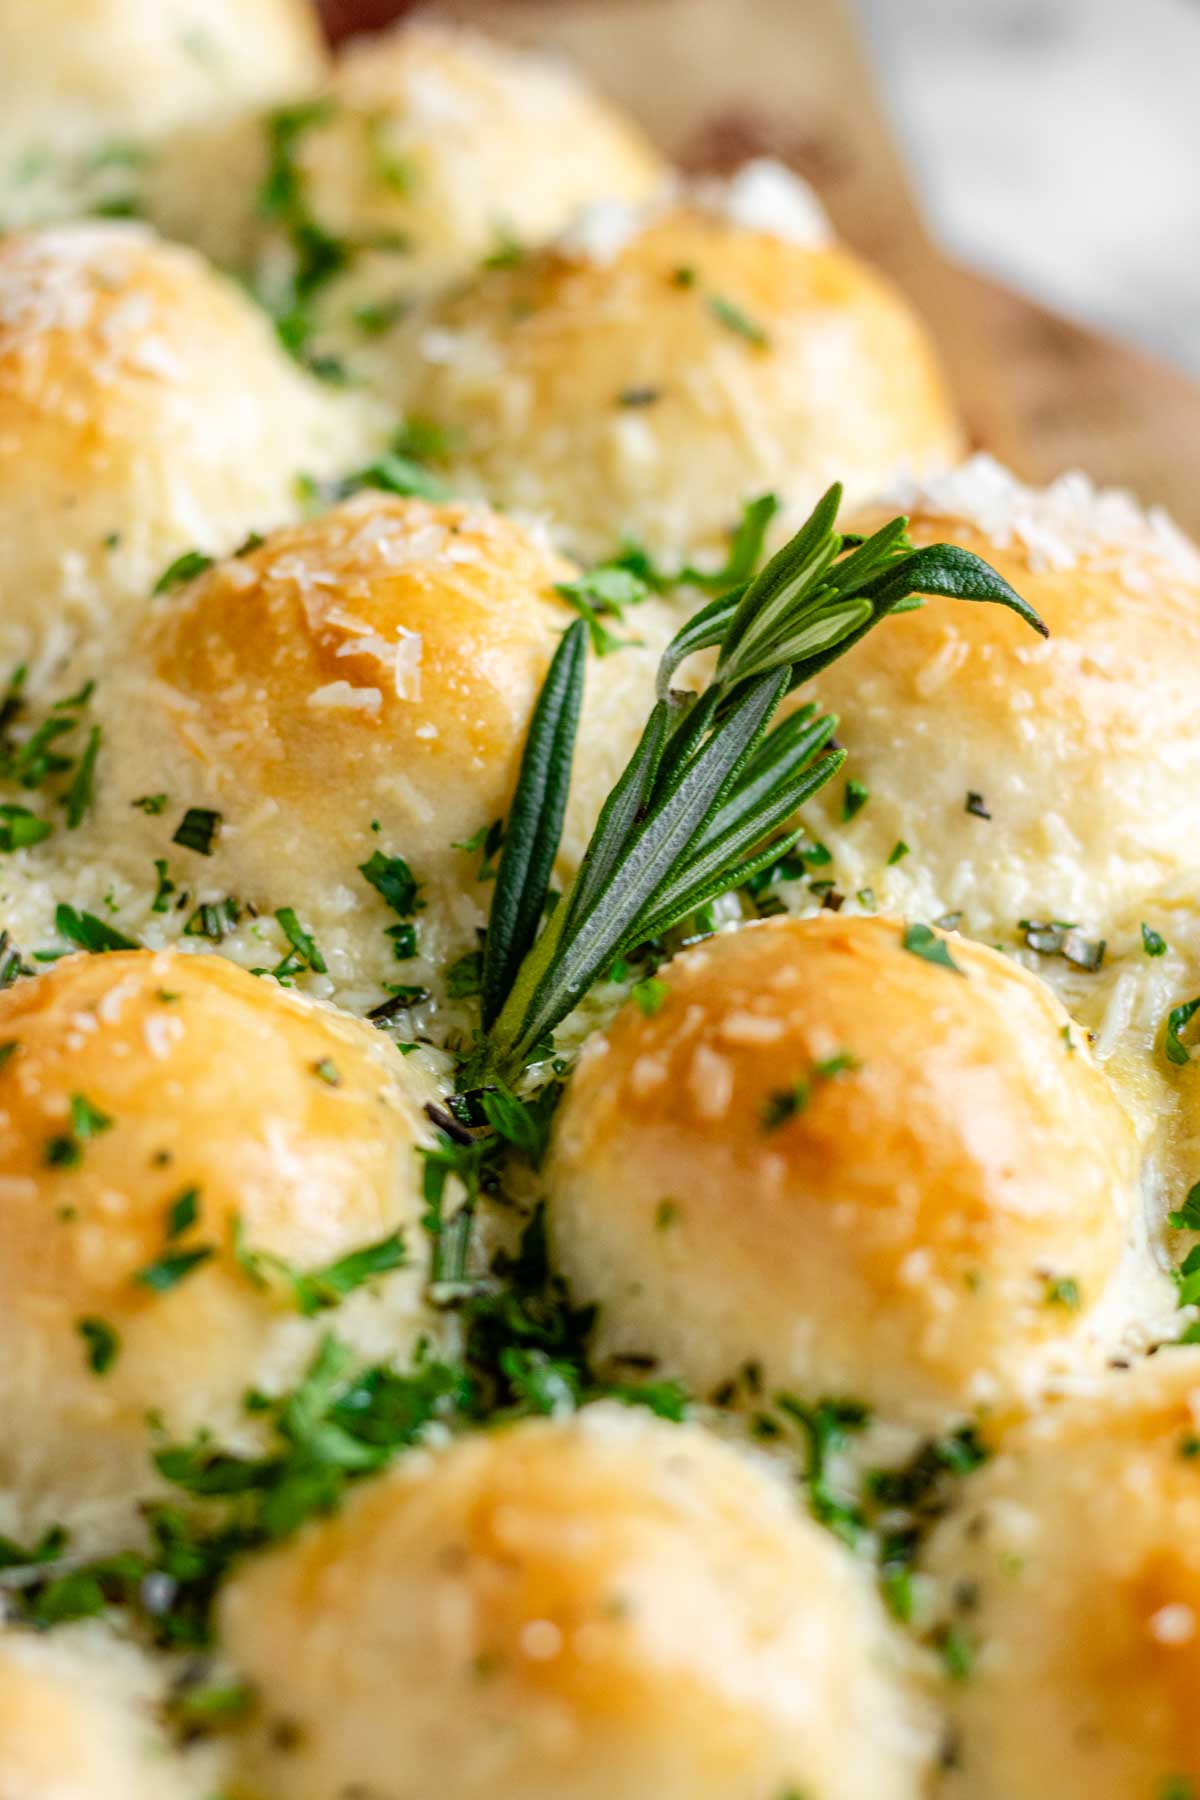 Close up of rolls of dough baked in the shape of a Christmas tree, garnished with cheese and fresh herbs.